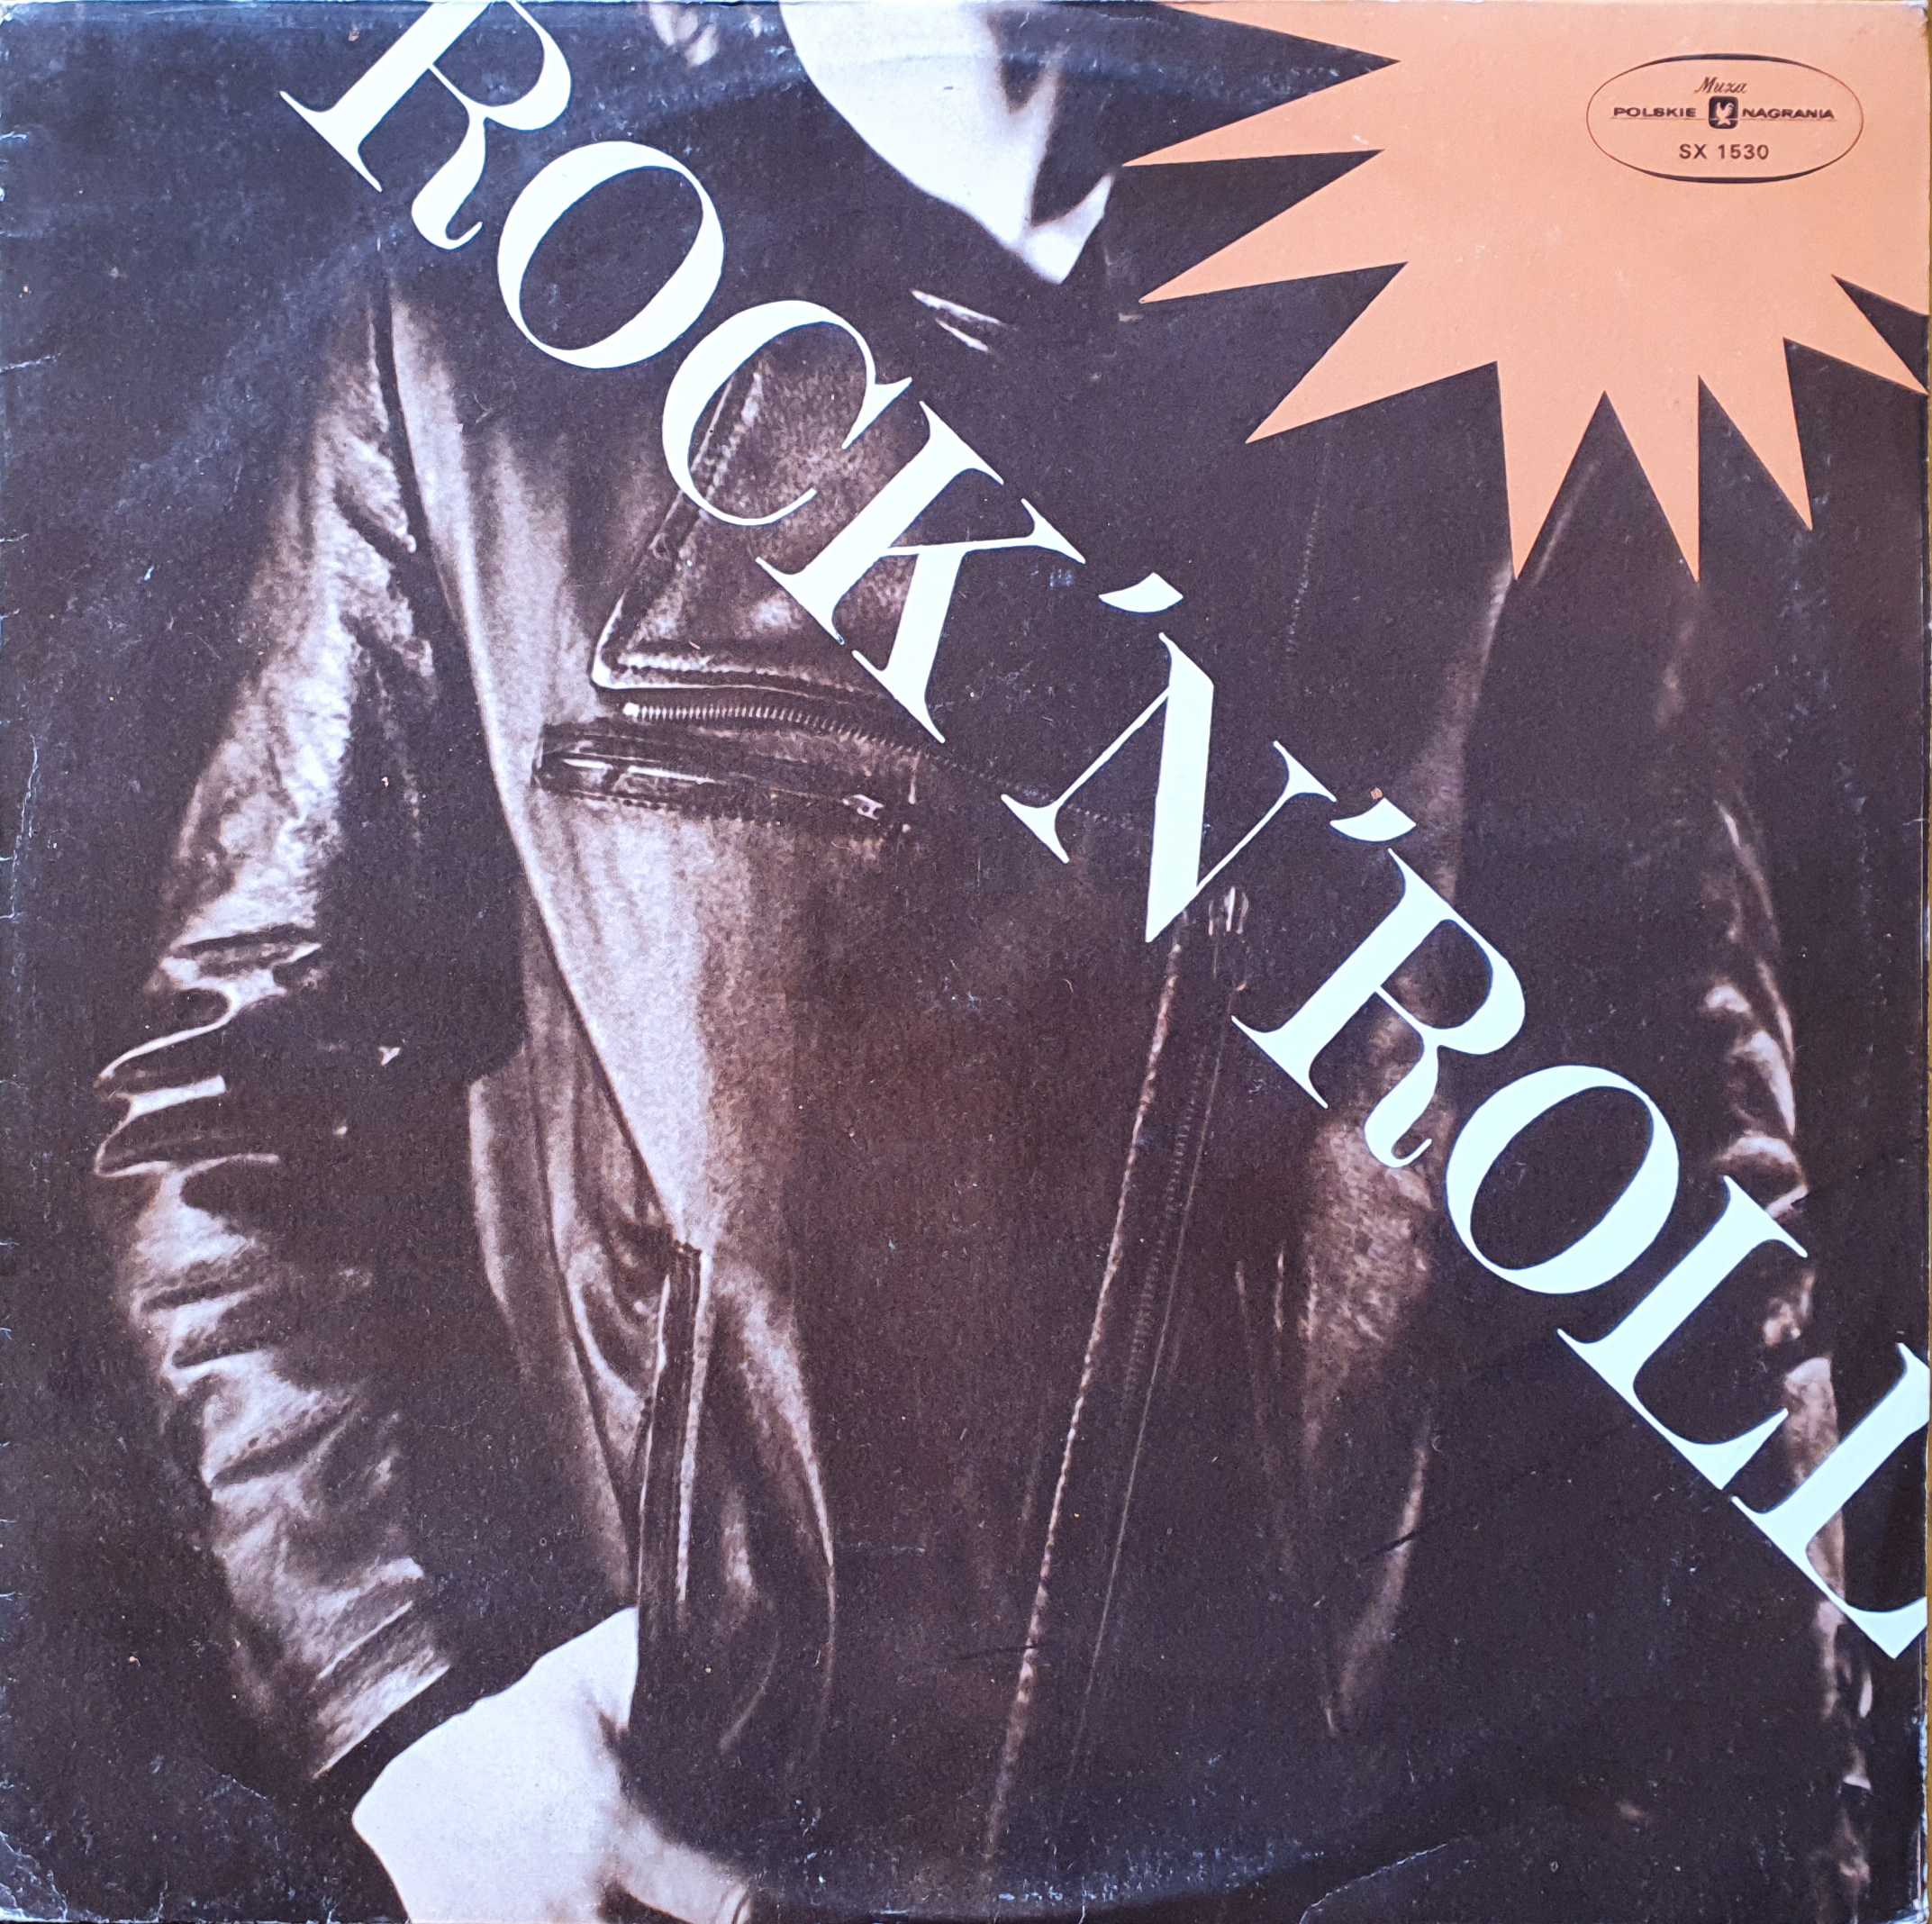 Picture of Rock 'n' roll by artist Various from the BBC albums - Records and Tapes library